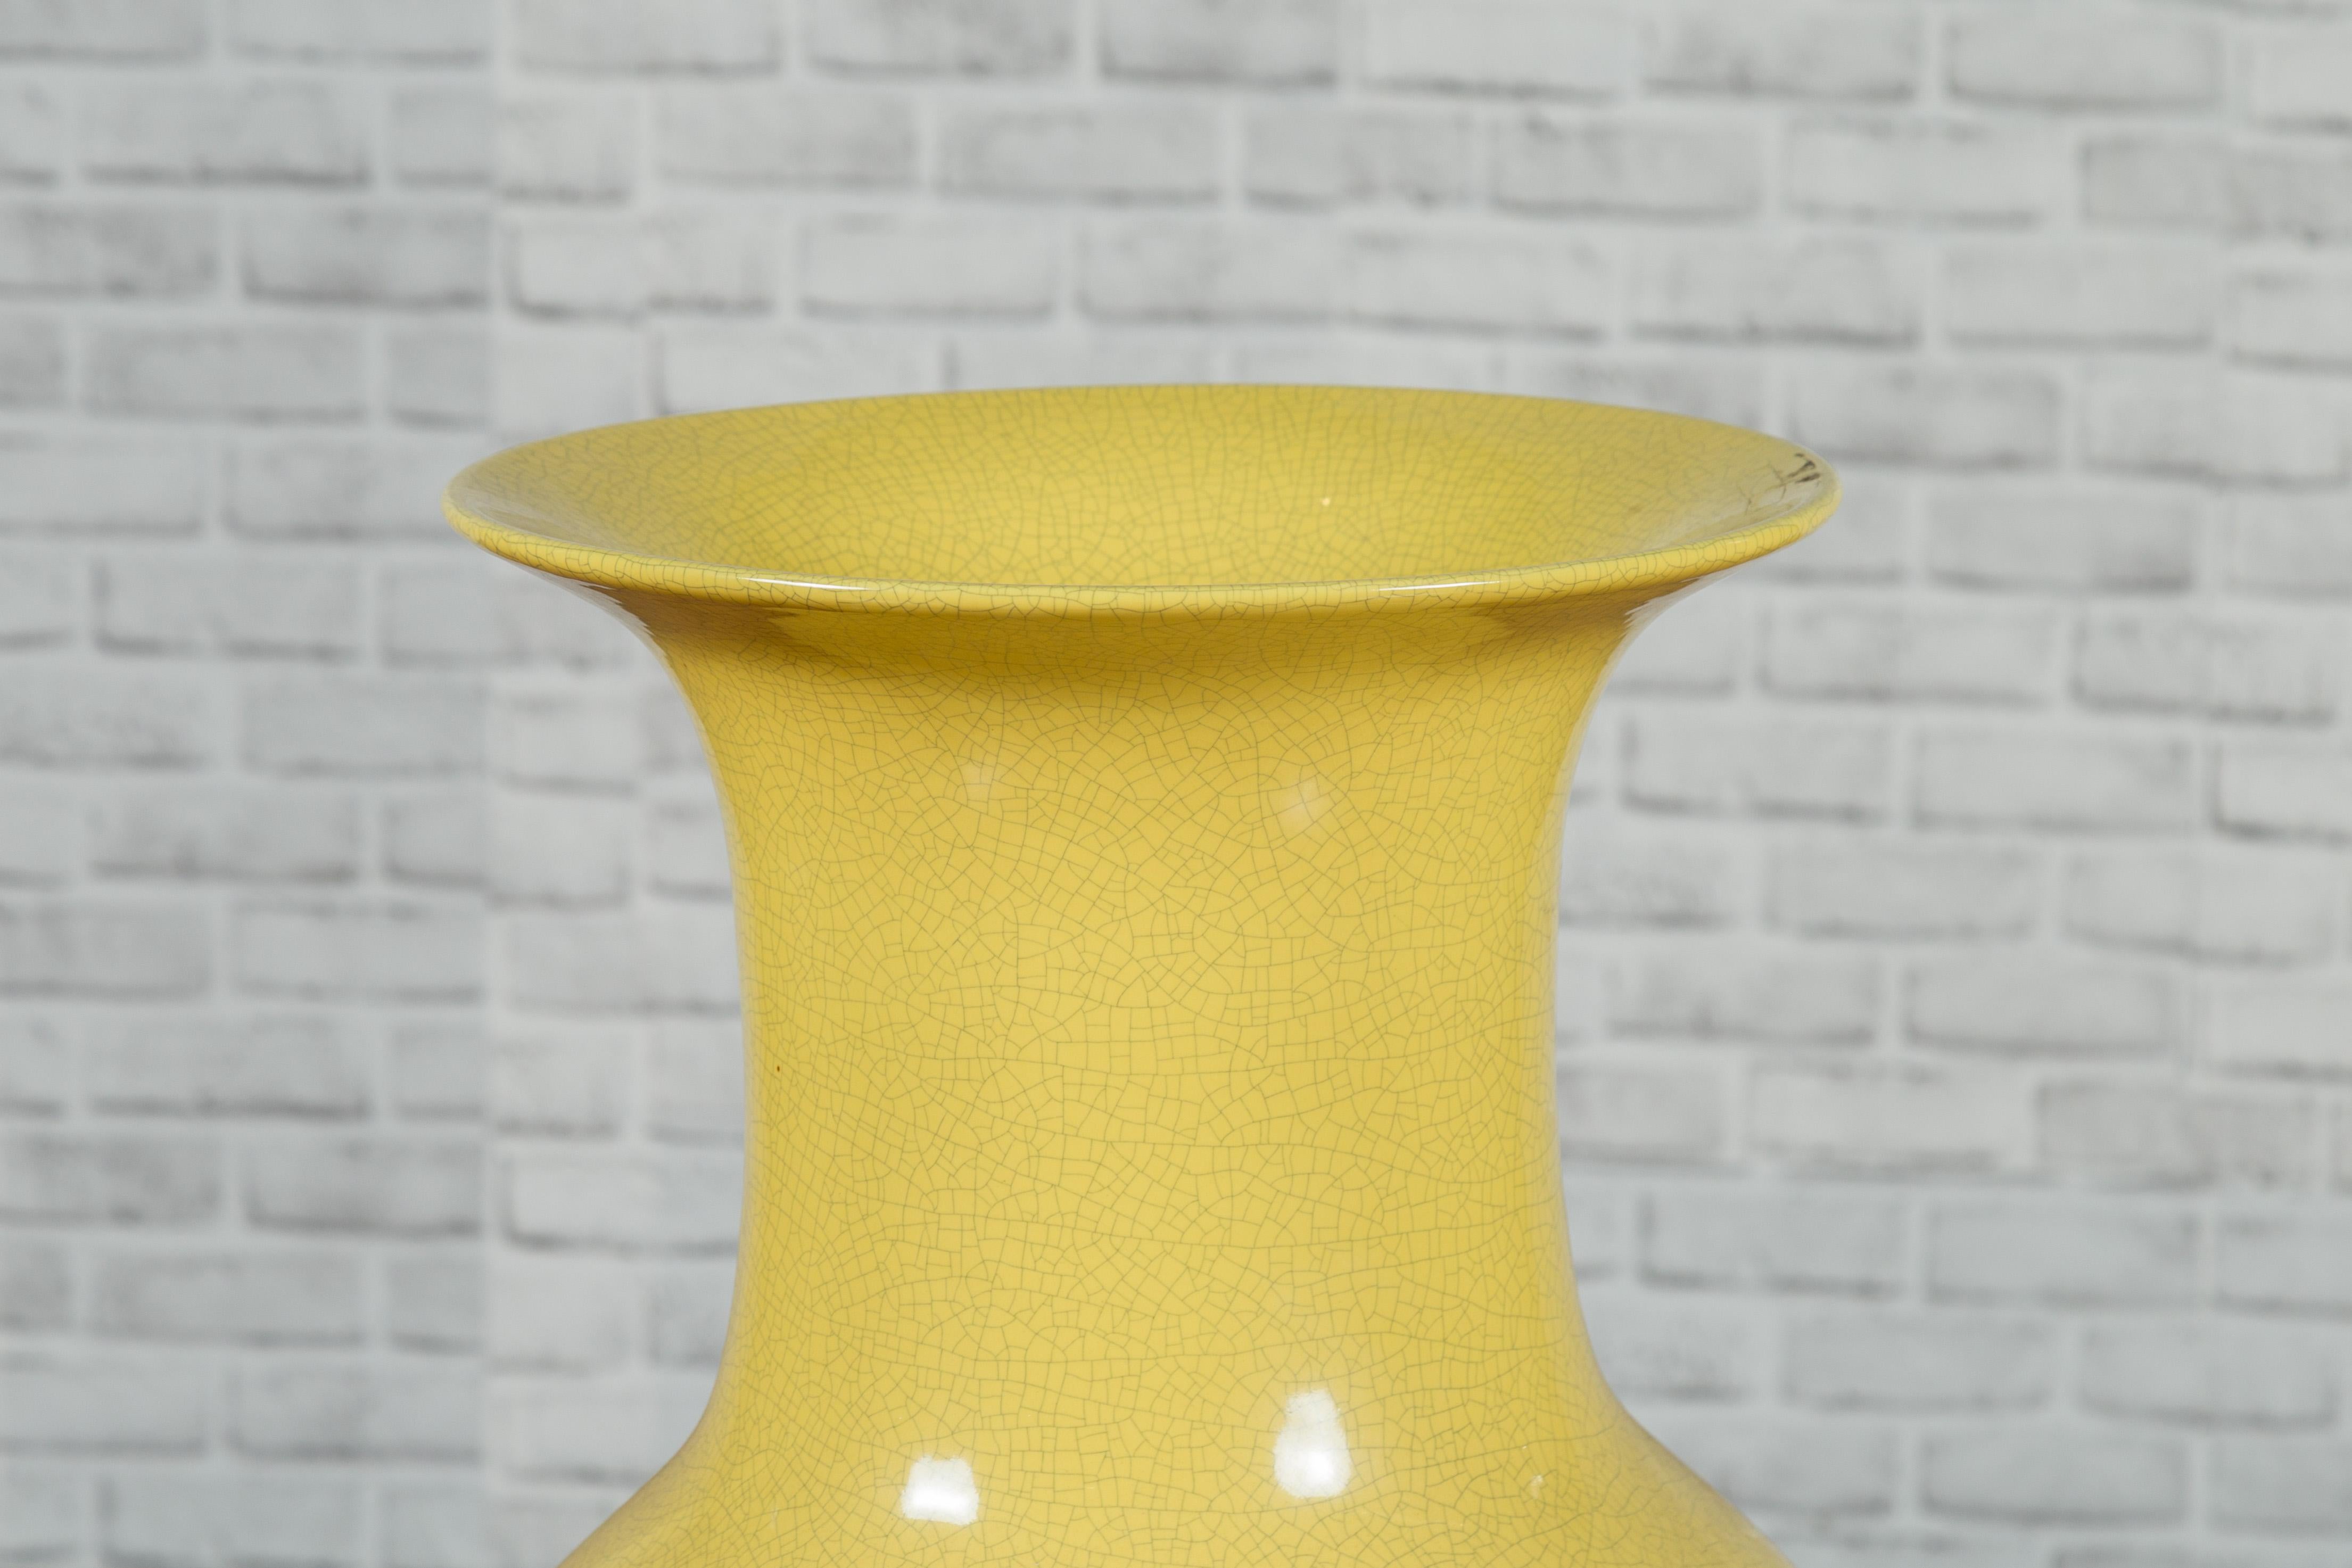 Chinese Extra Large Vintage Vase with Yellow Crackled Finish and Flaring Mouth In Good Condition For Sale In Yonkers, NY